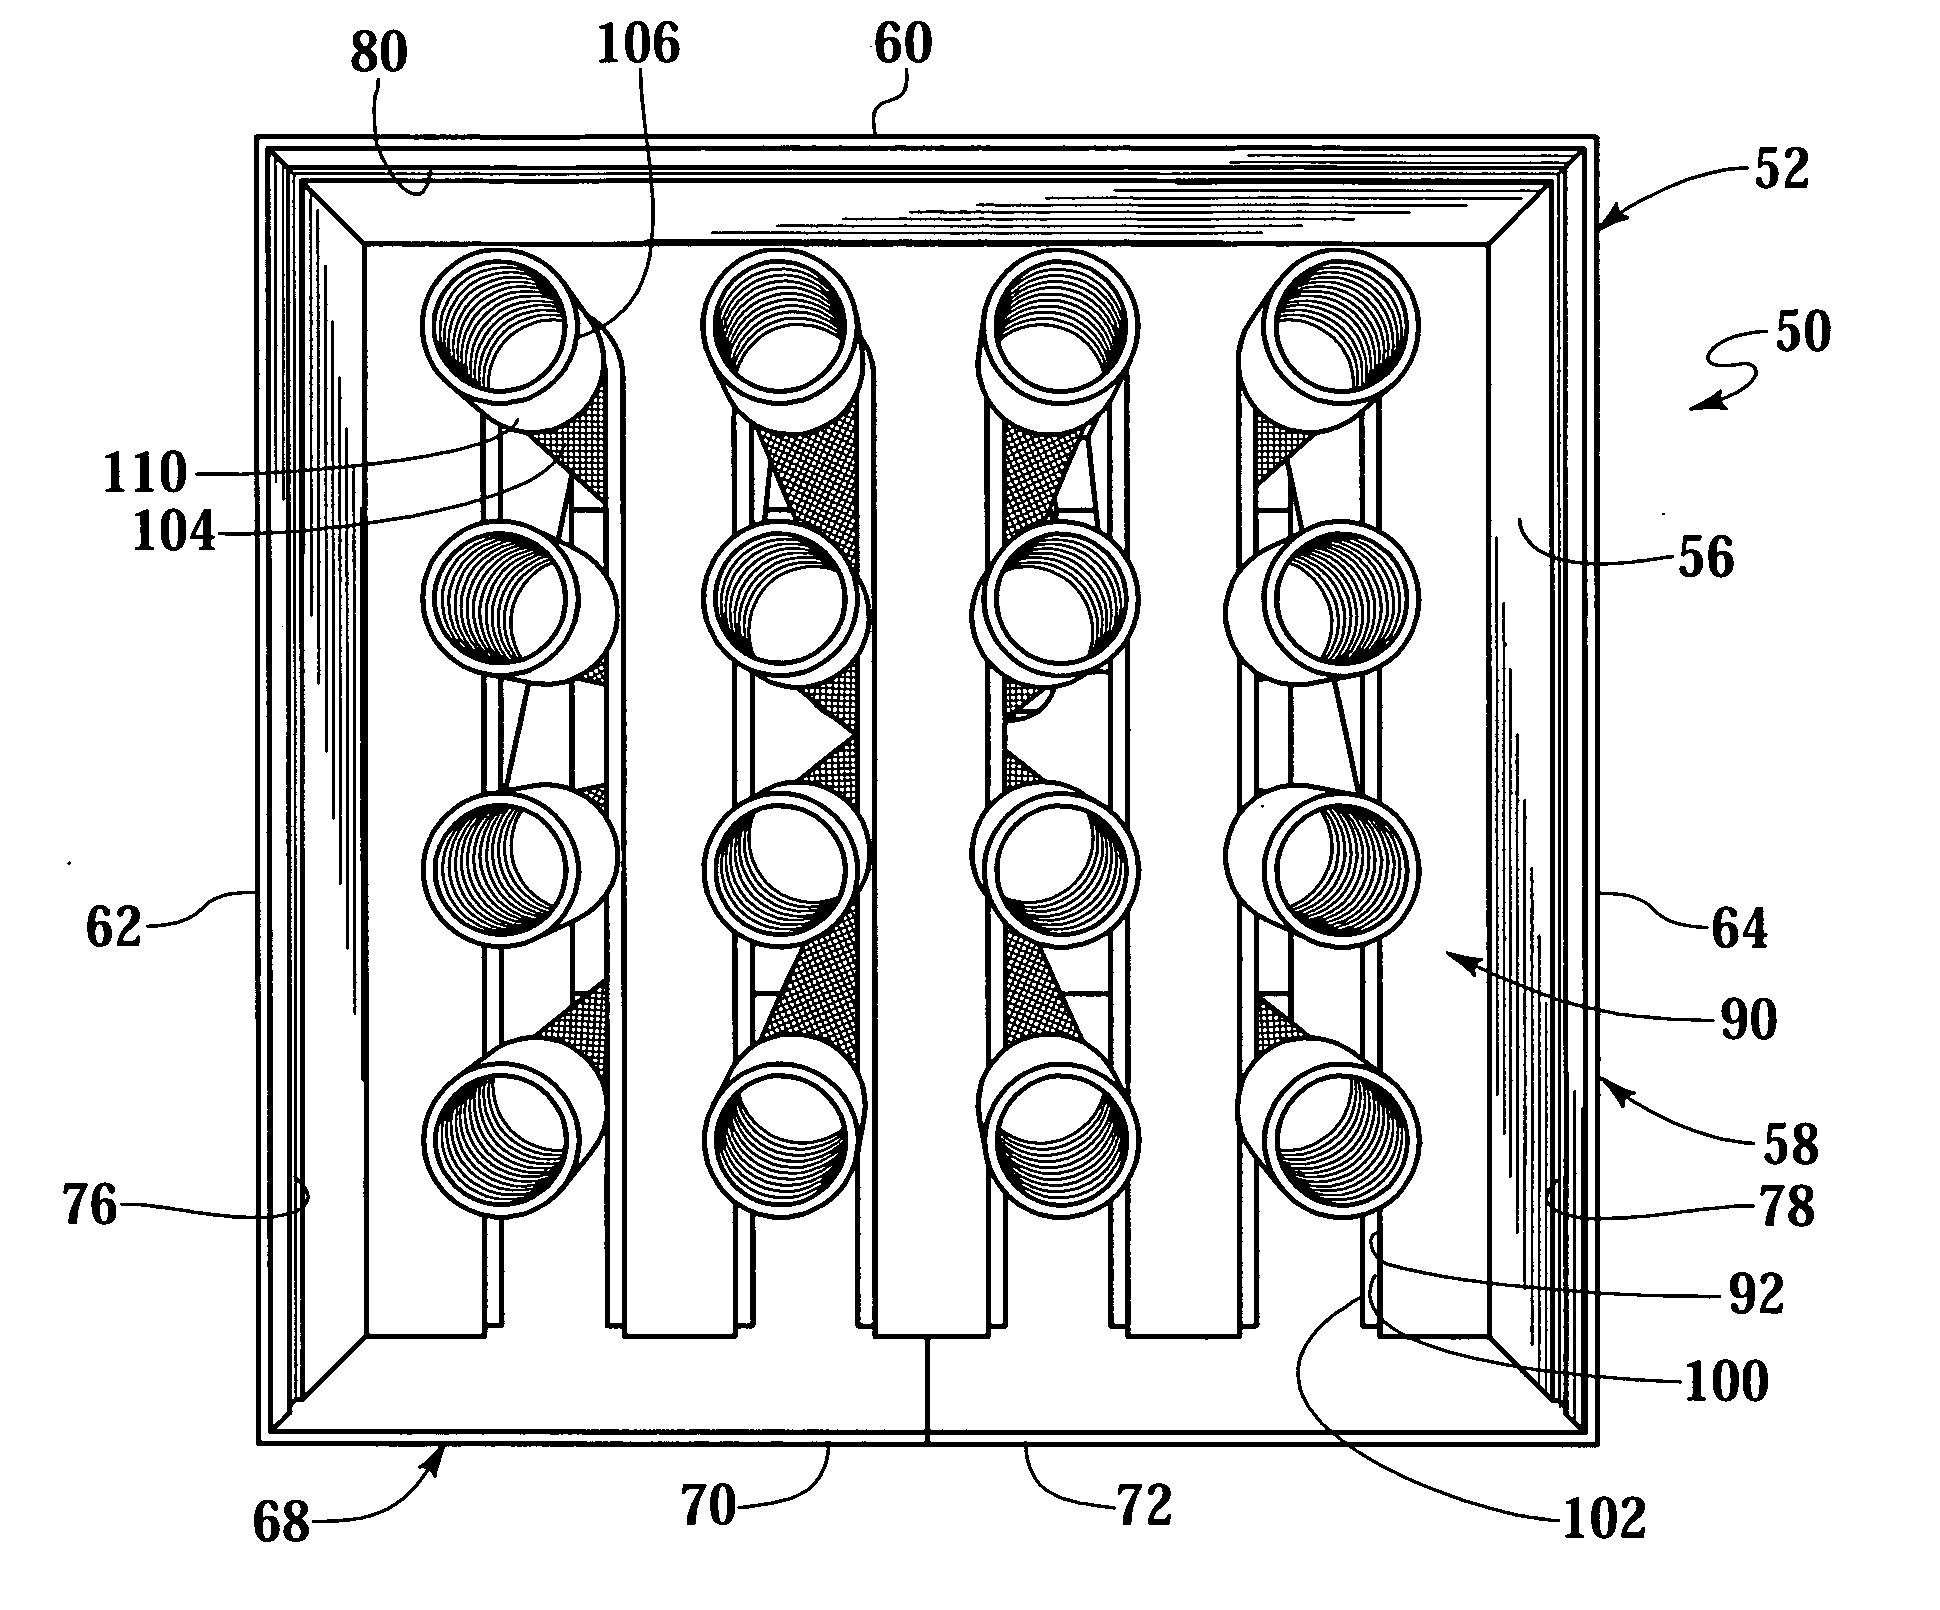 Apparatus and method for transporting and deploying downhole completion components